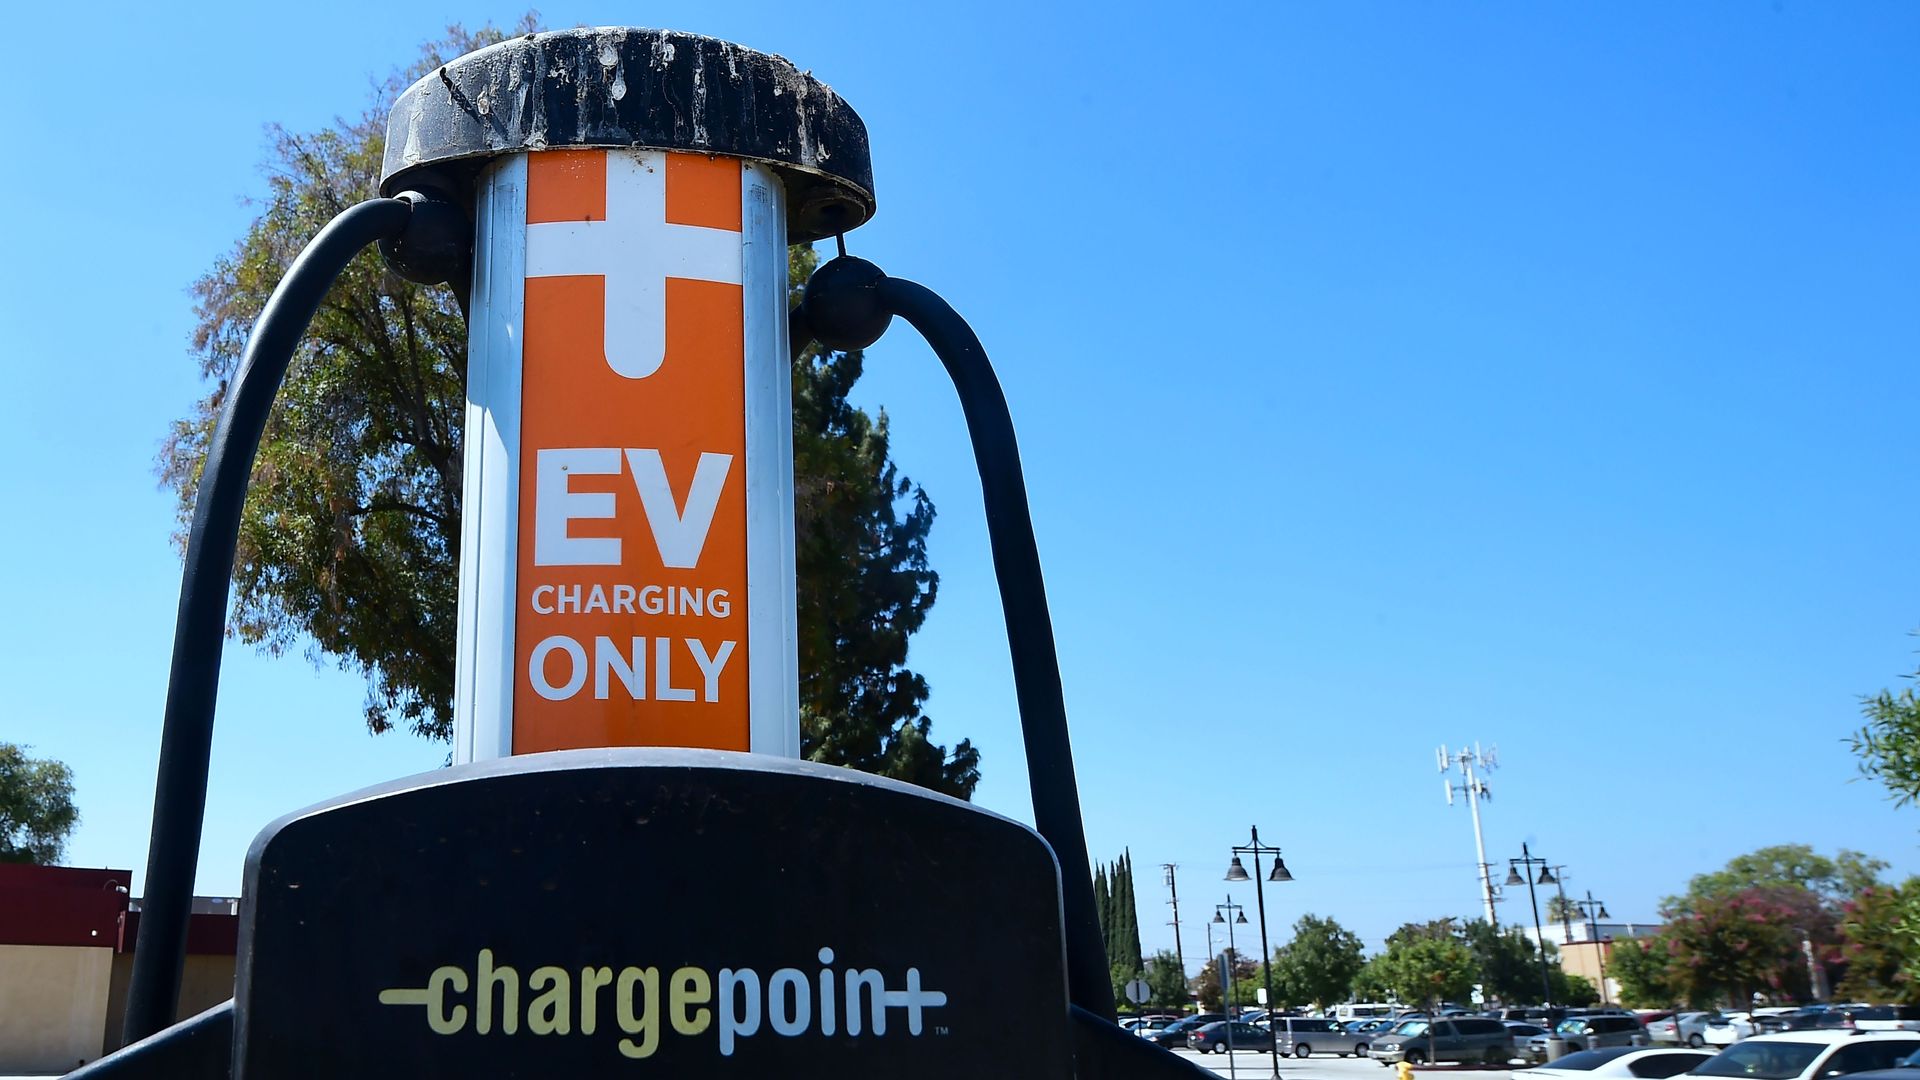 Non-electric vehicles fill a parking lot in Rosemead, California, where two Electric Vehicle charging stations are offered